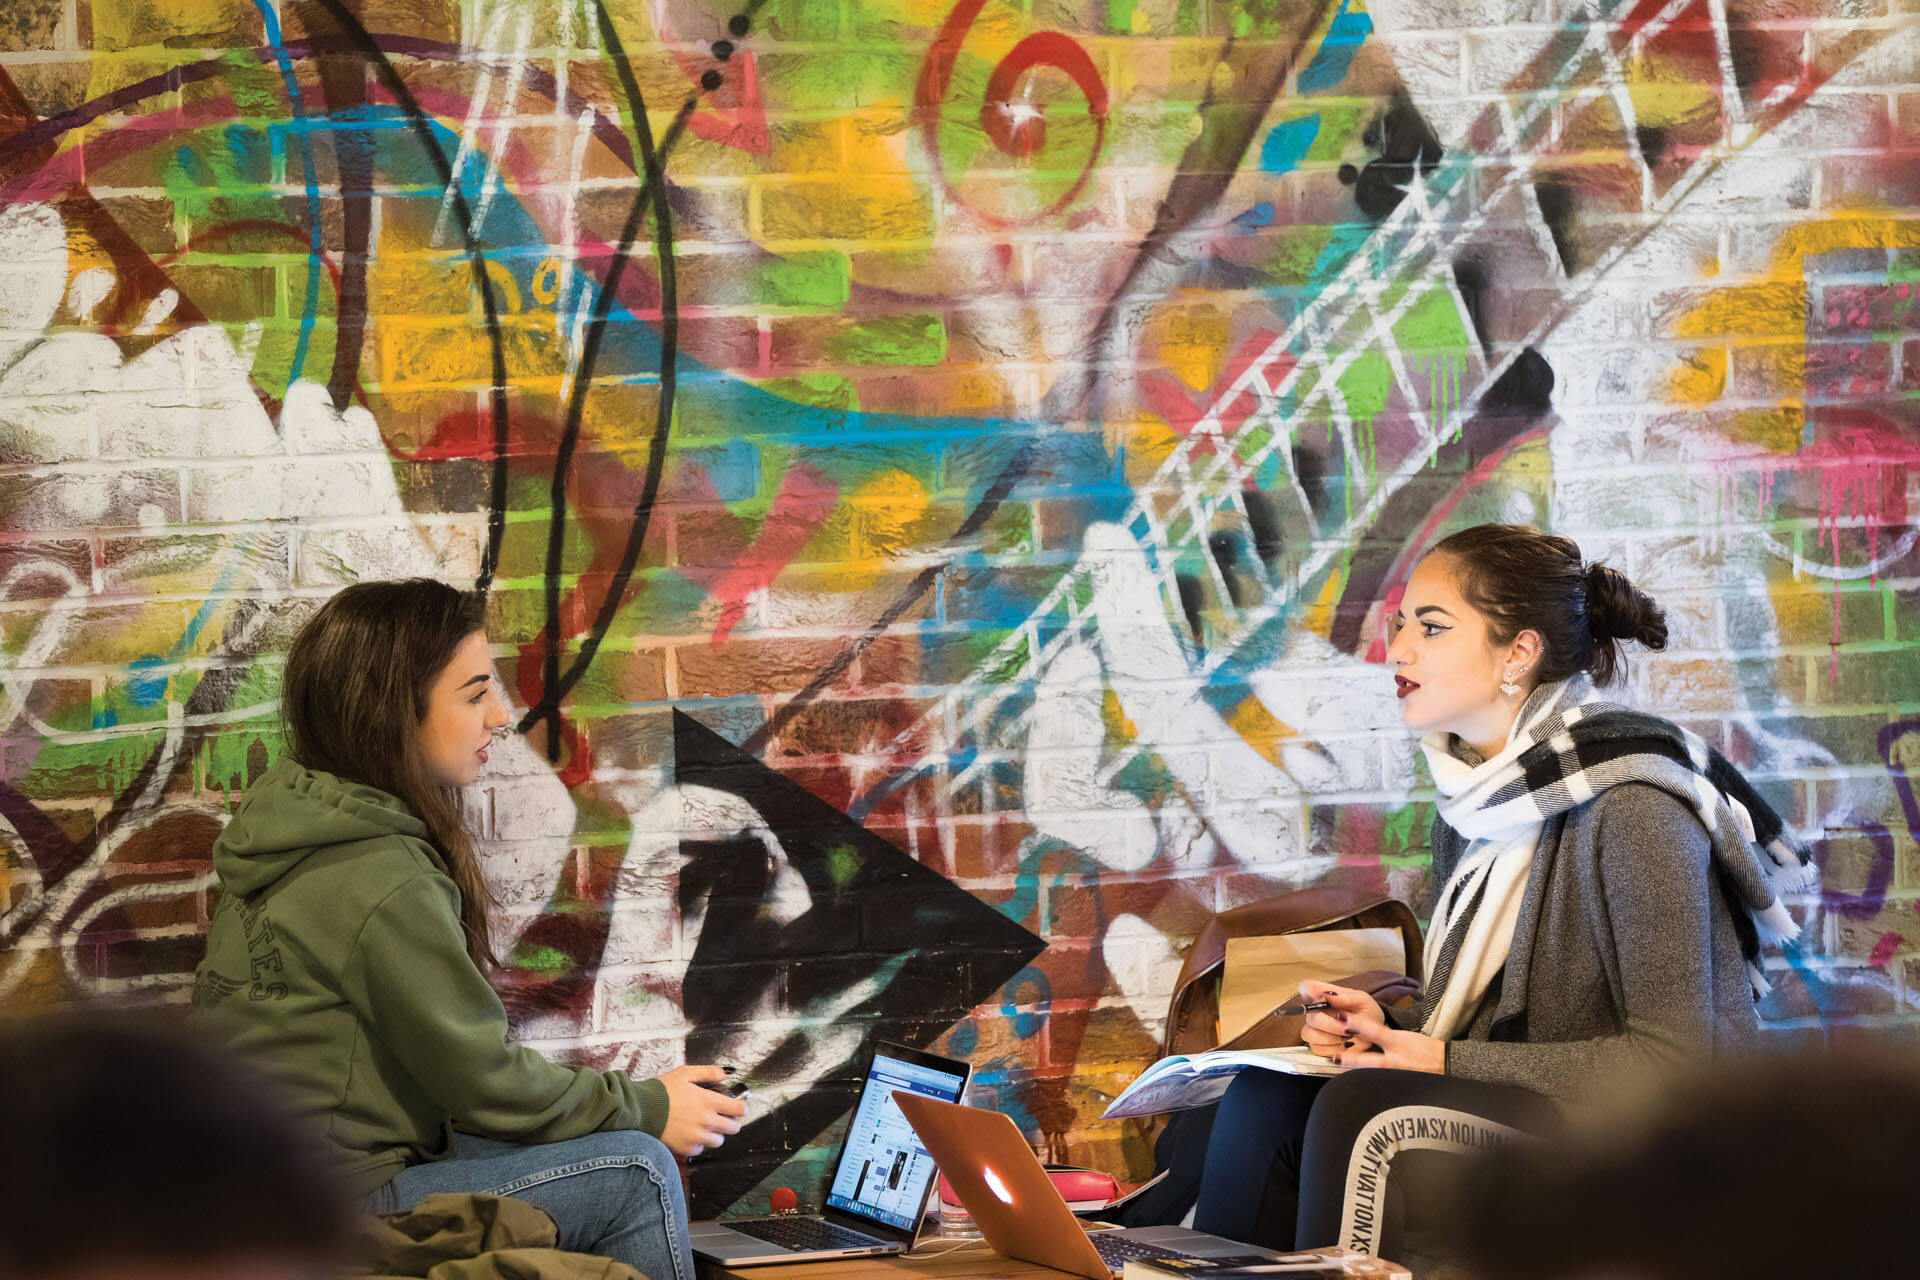 Two female students talking with a graffetti wall in the background.